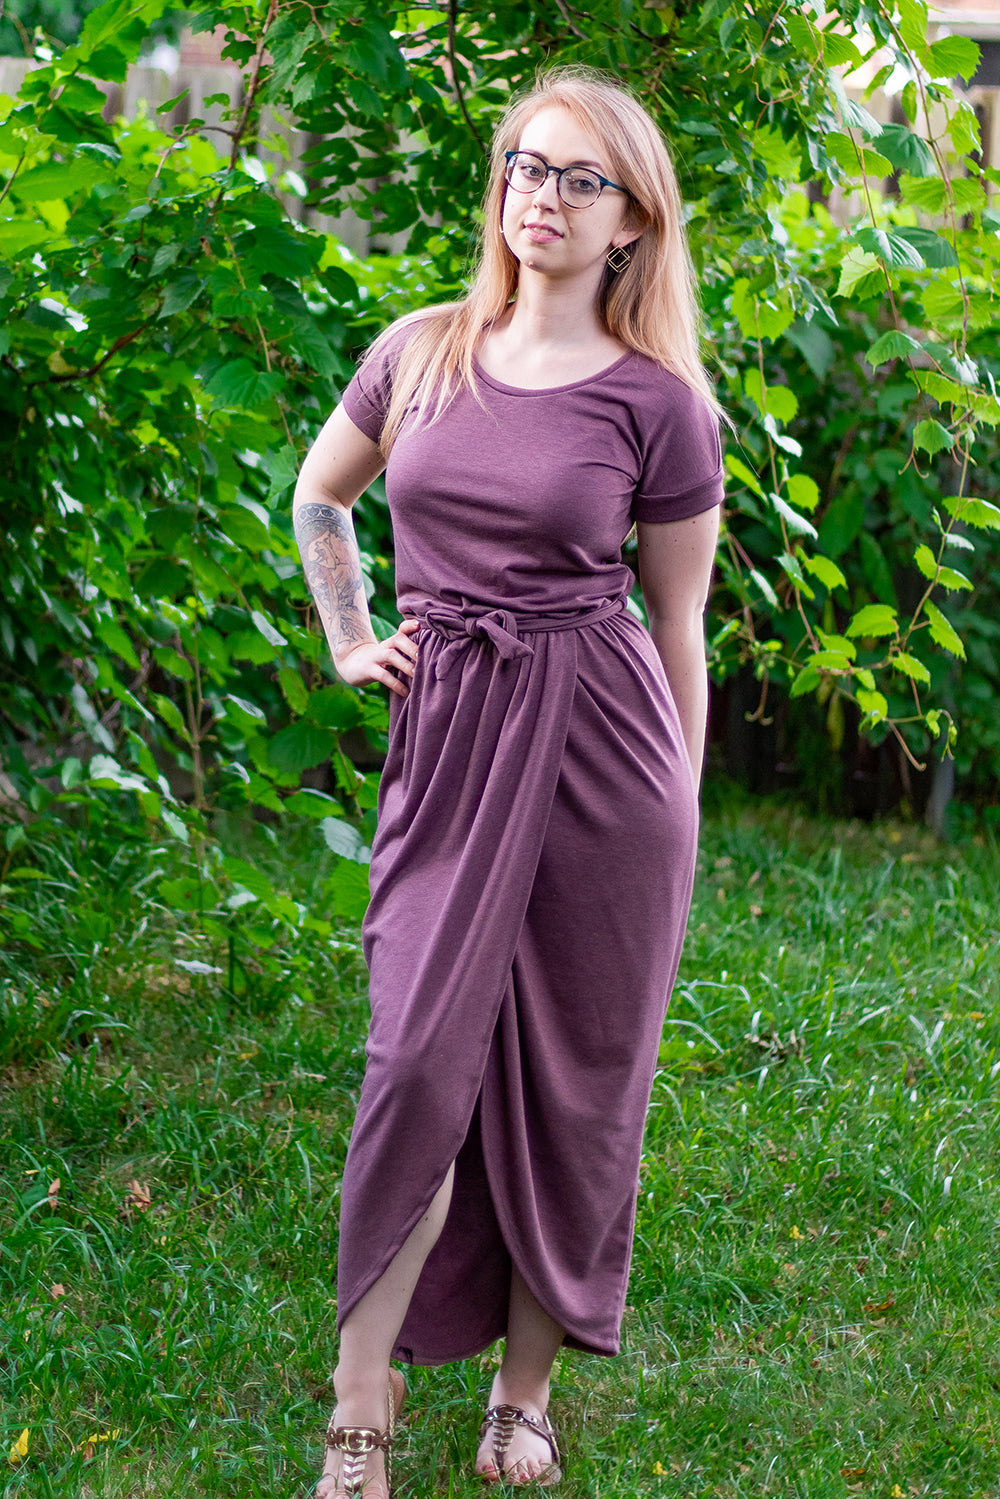 The Rosa in misses size. Features a scoop neck, short sleeves, and maxi length shirt option. 